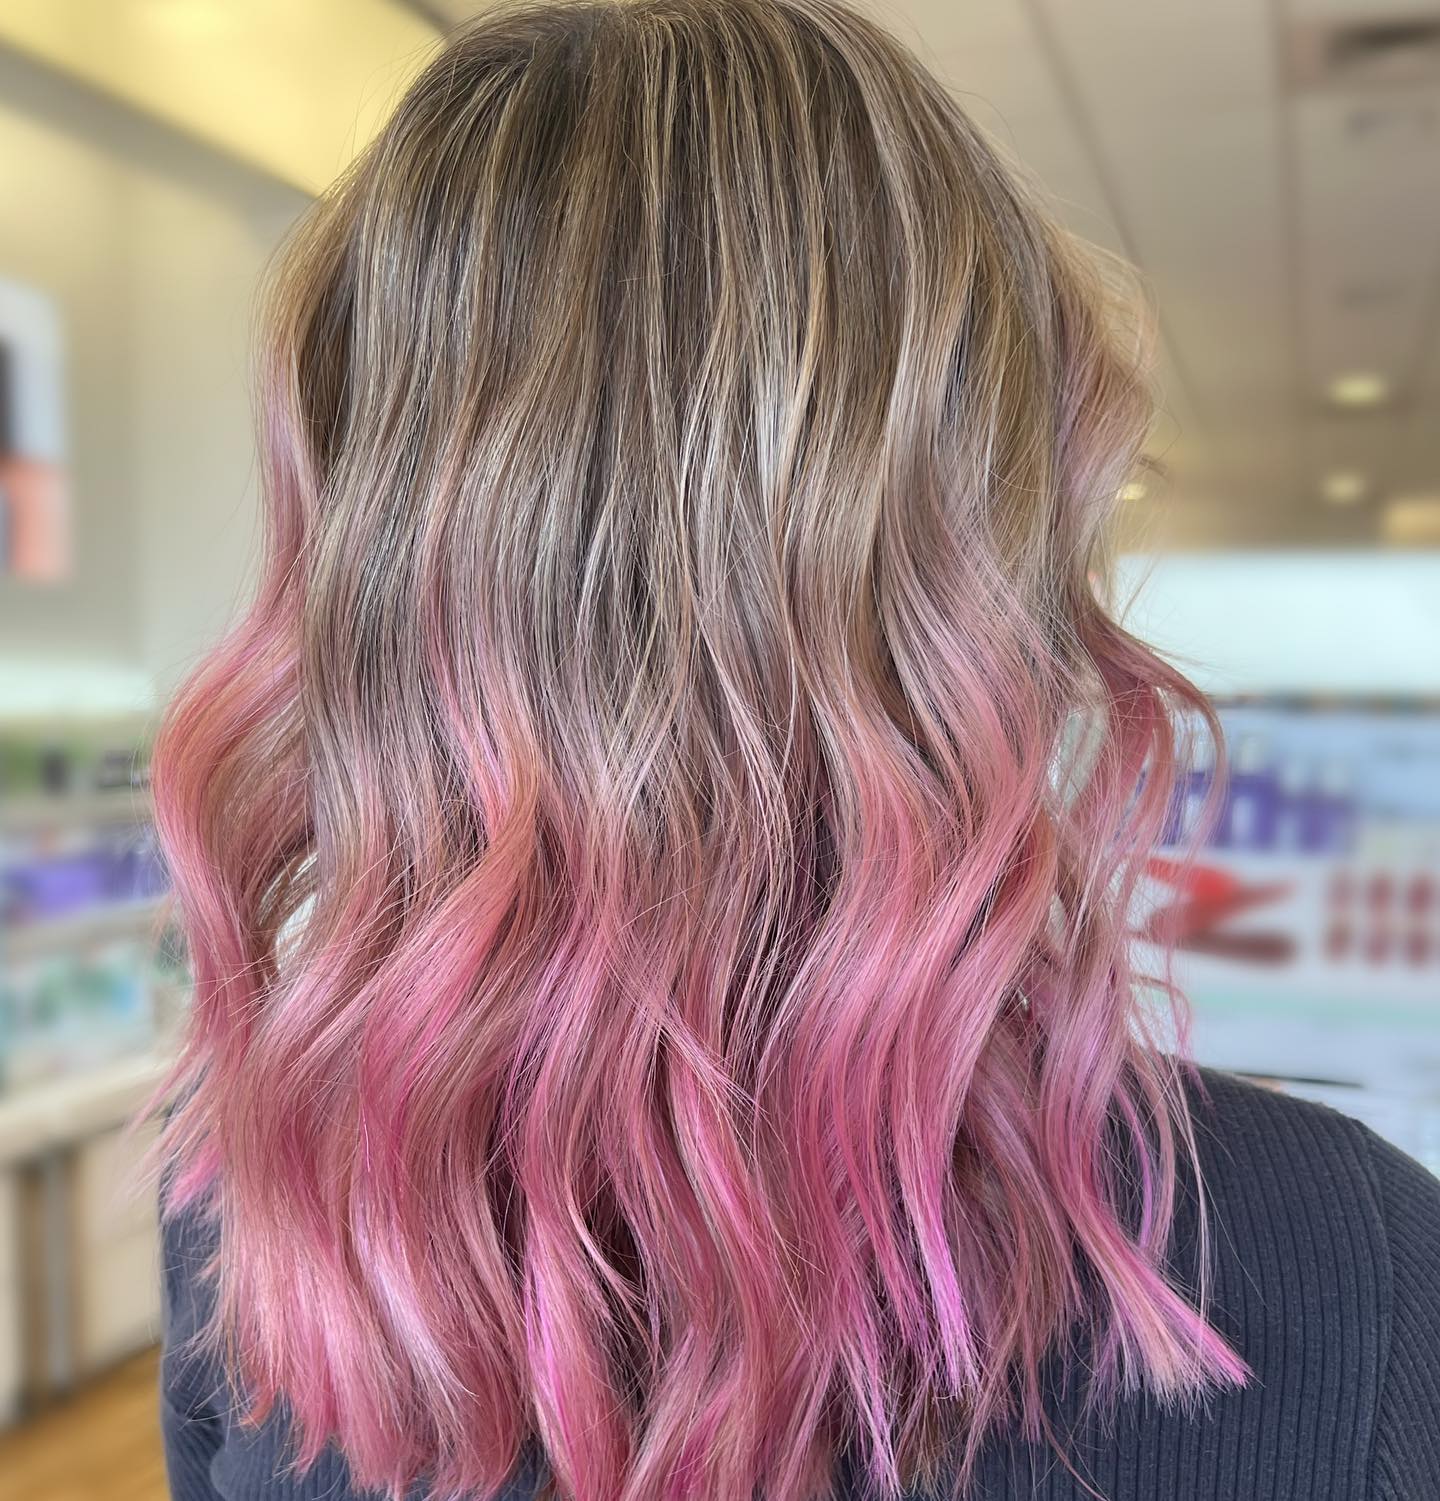 pink ombre hair color 77 Ombre pink hair blonde | Pastel pink ombre hair | Pink balayage Hair Pink Ombre Hair Color for Women